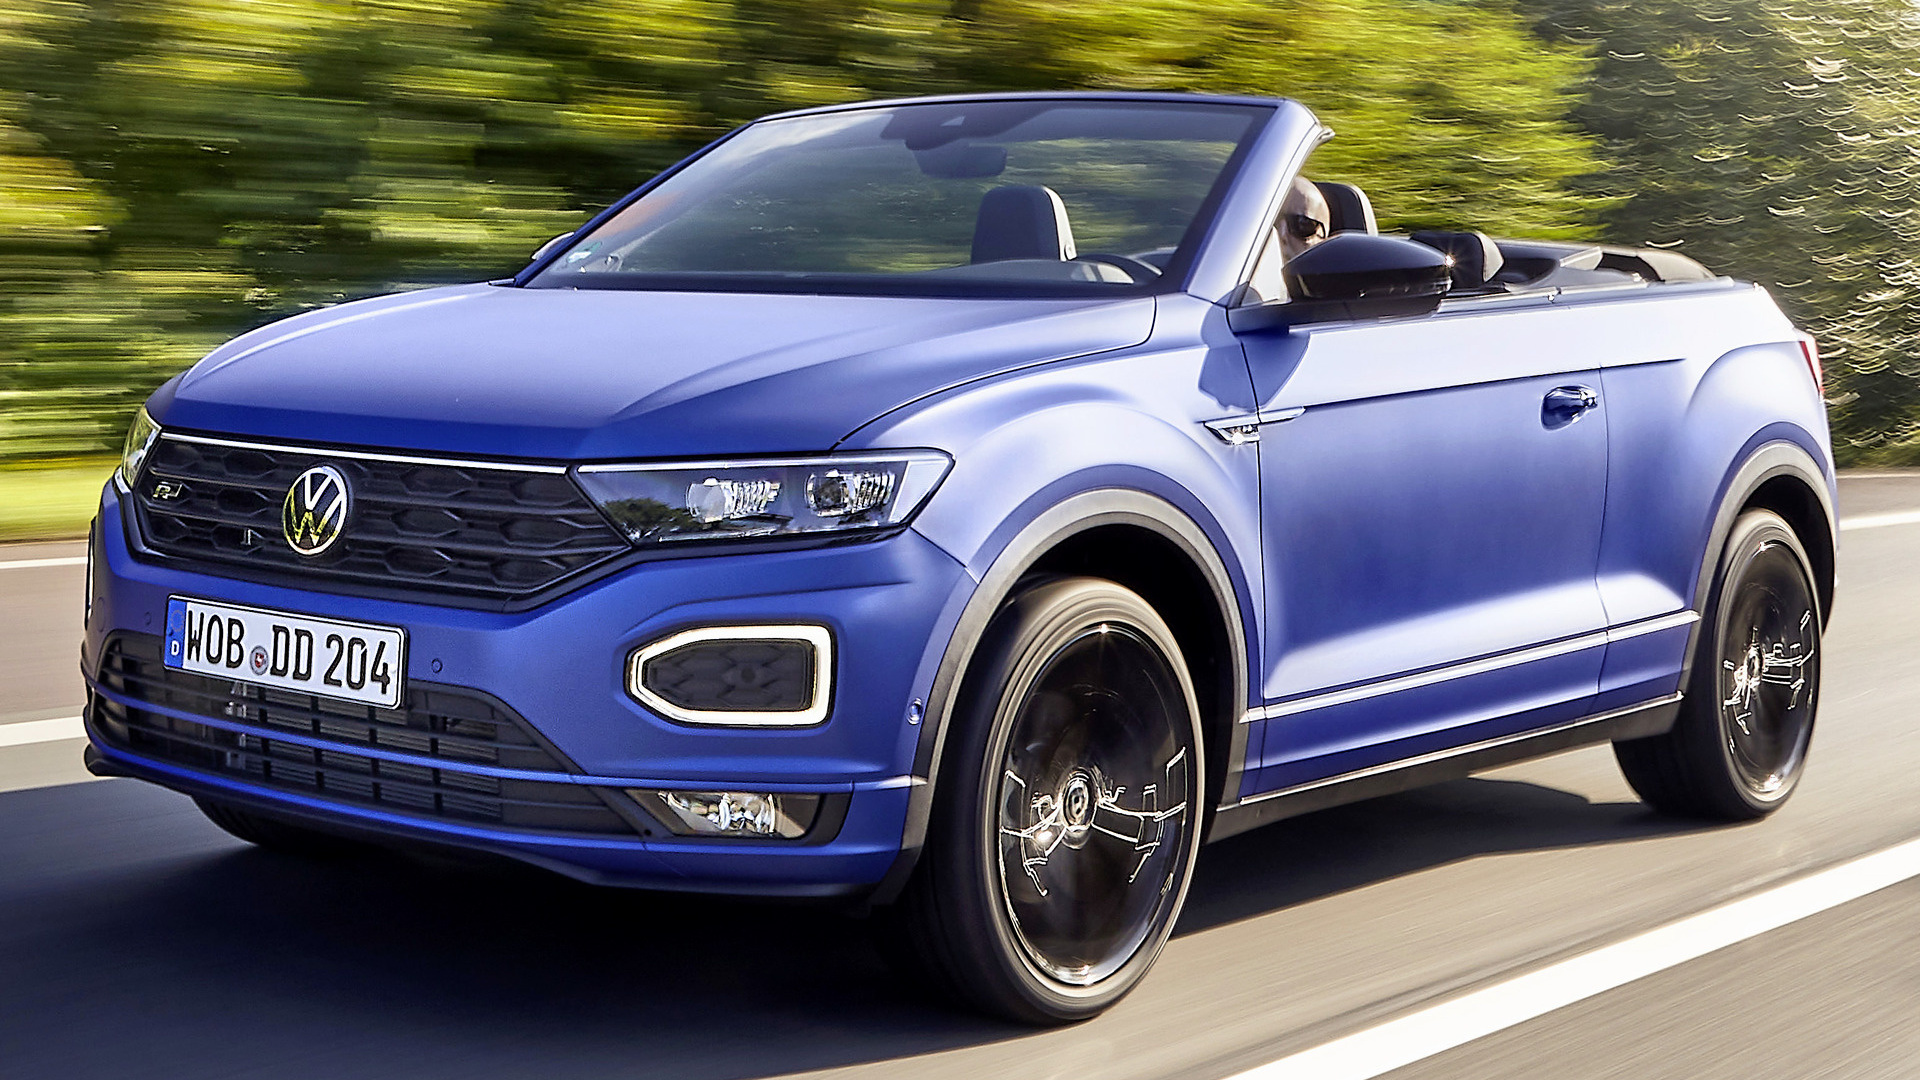 2021 Volkswagen T-Roc Cabriolet Blue Edition - Wallpapers and HD Images ...